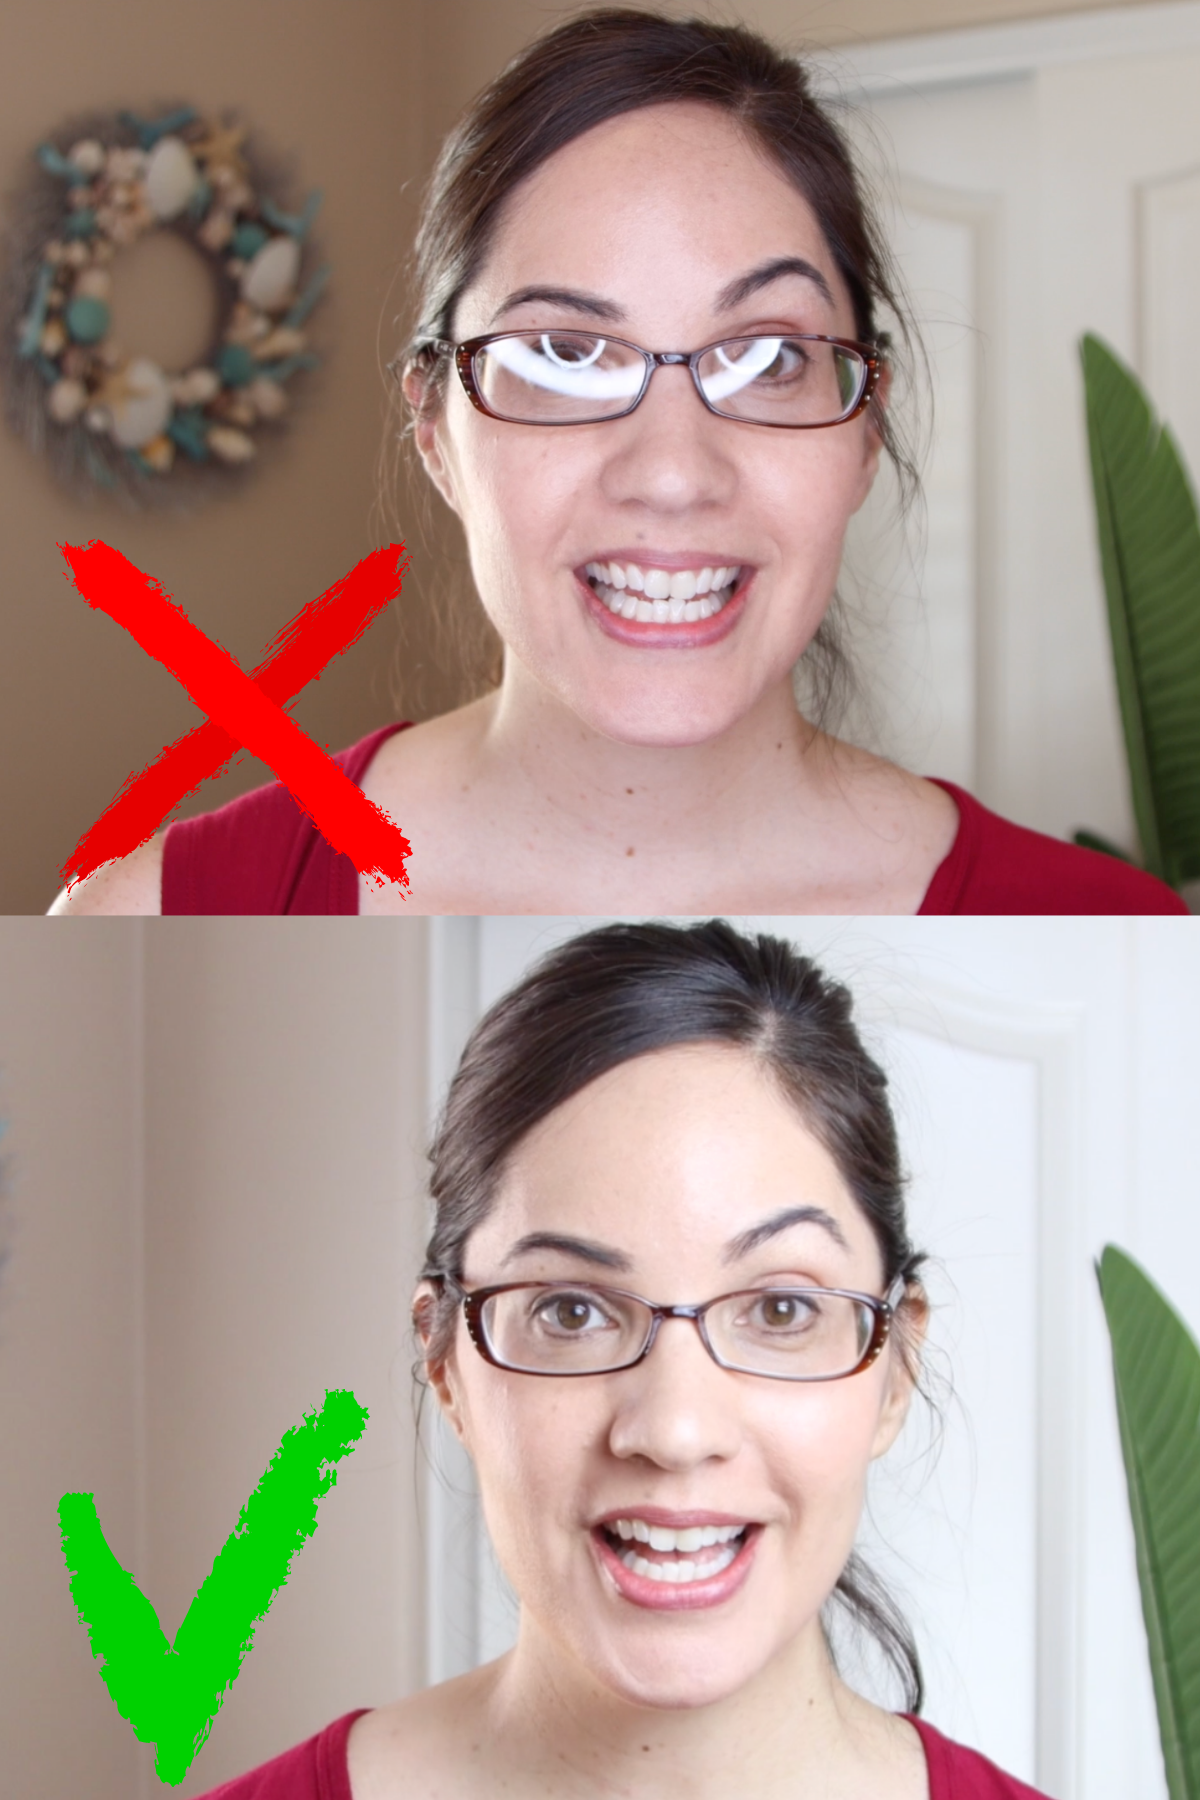 before and after how to avoid glare on glasses